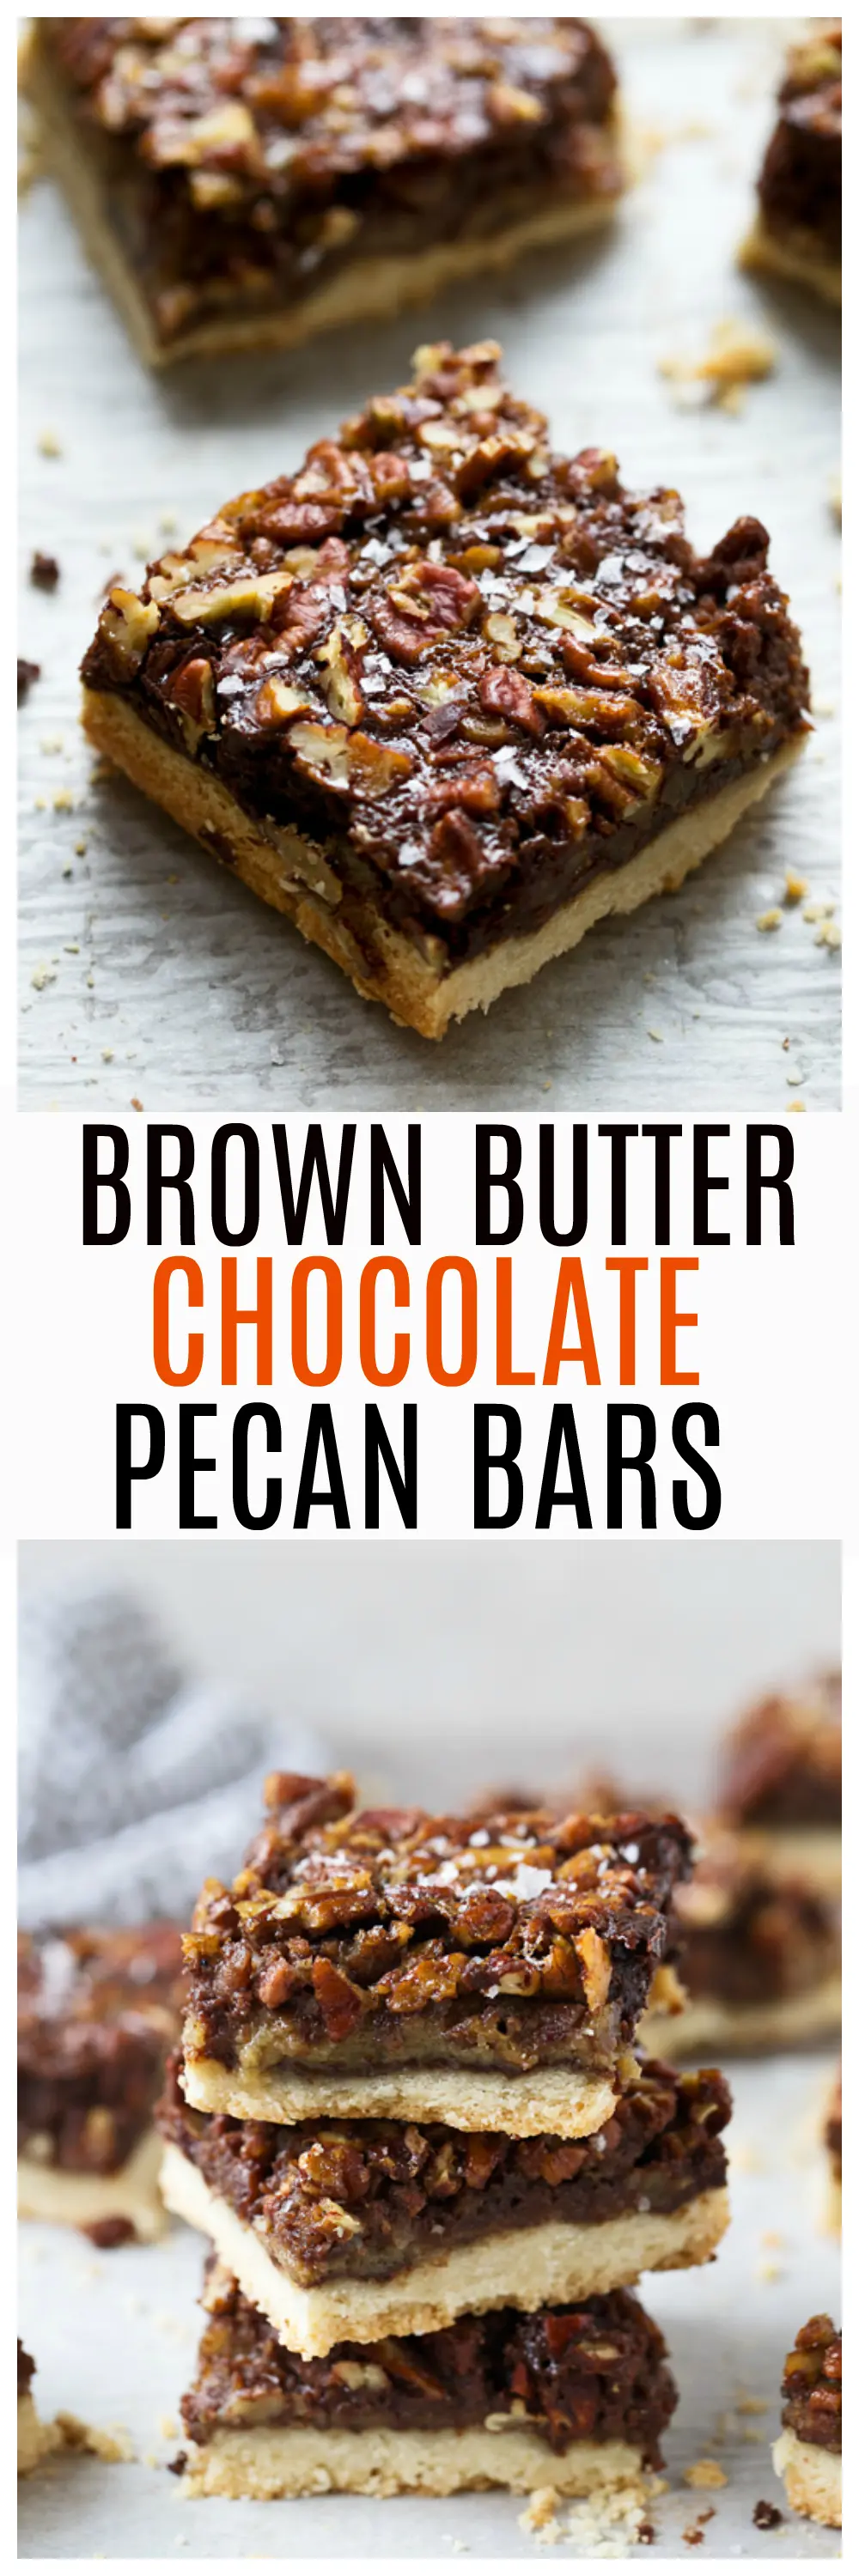 Brown Butter Chocolate Pecan Bars - Layers of salted shortbread, rich chocolate ganache and bourbon brown butter pecan filling. 